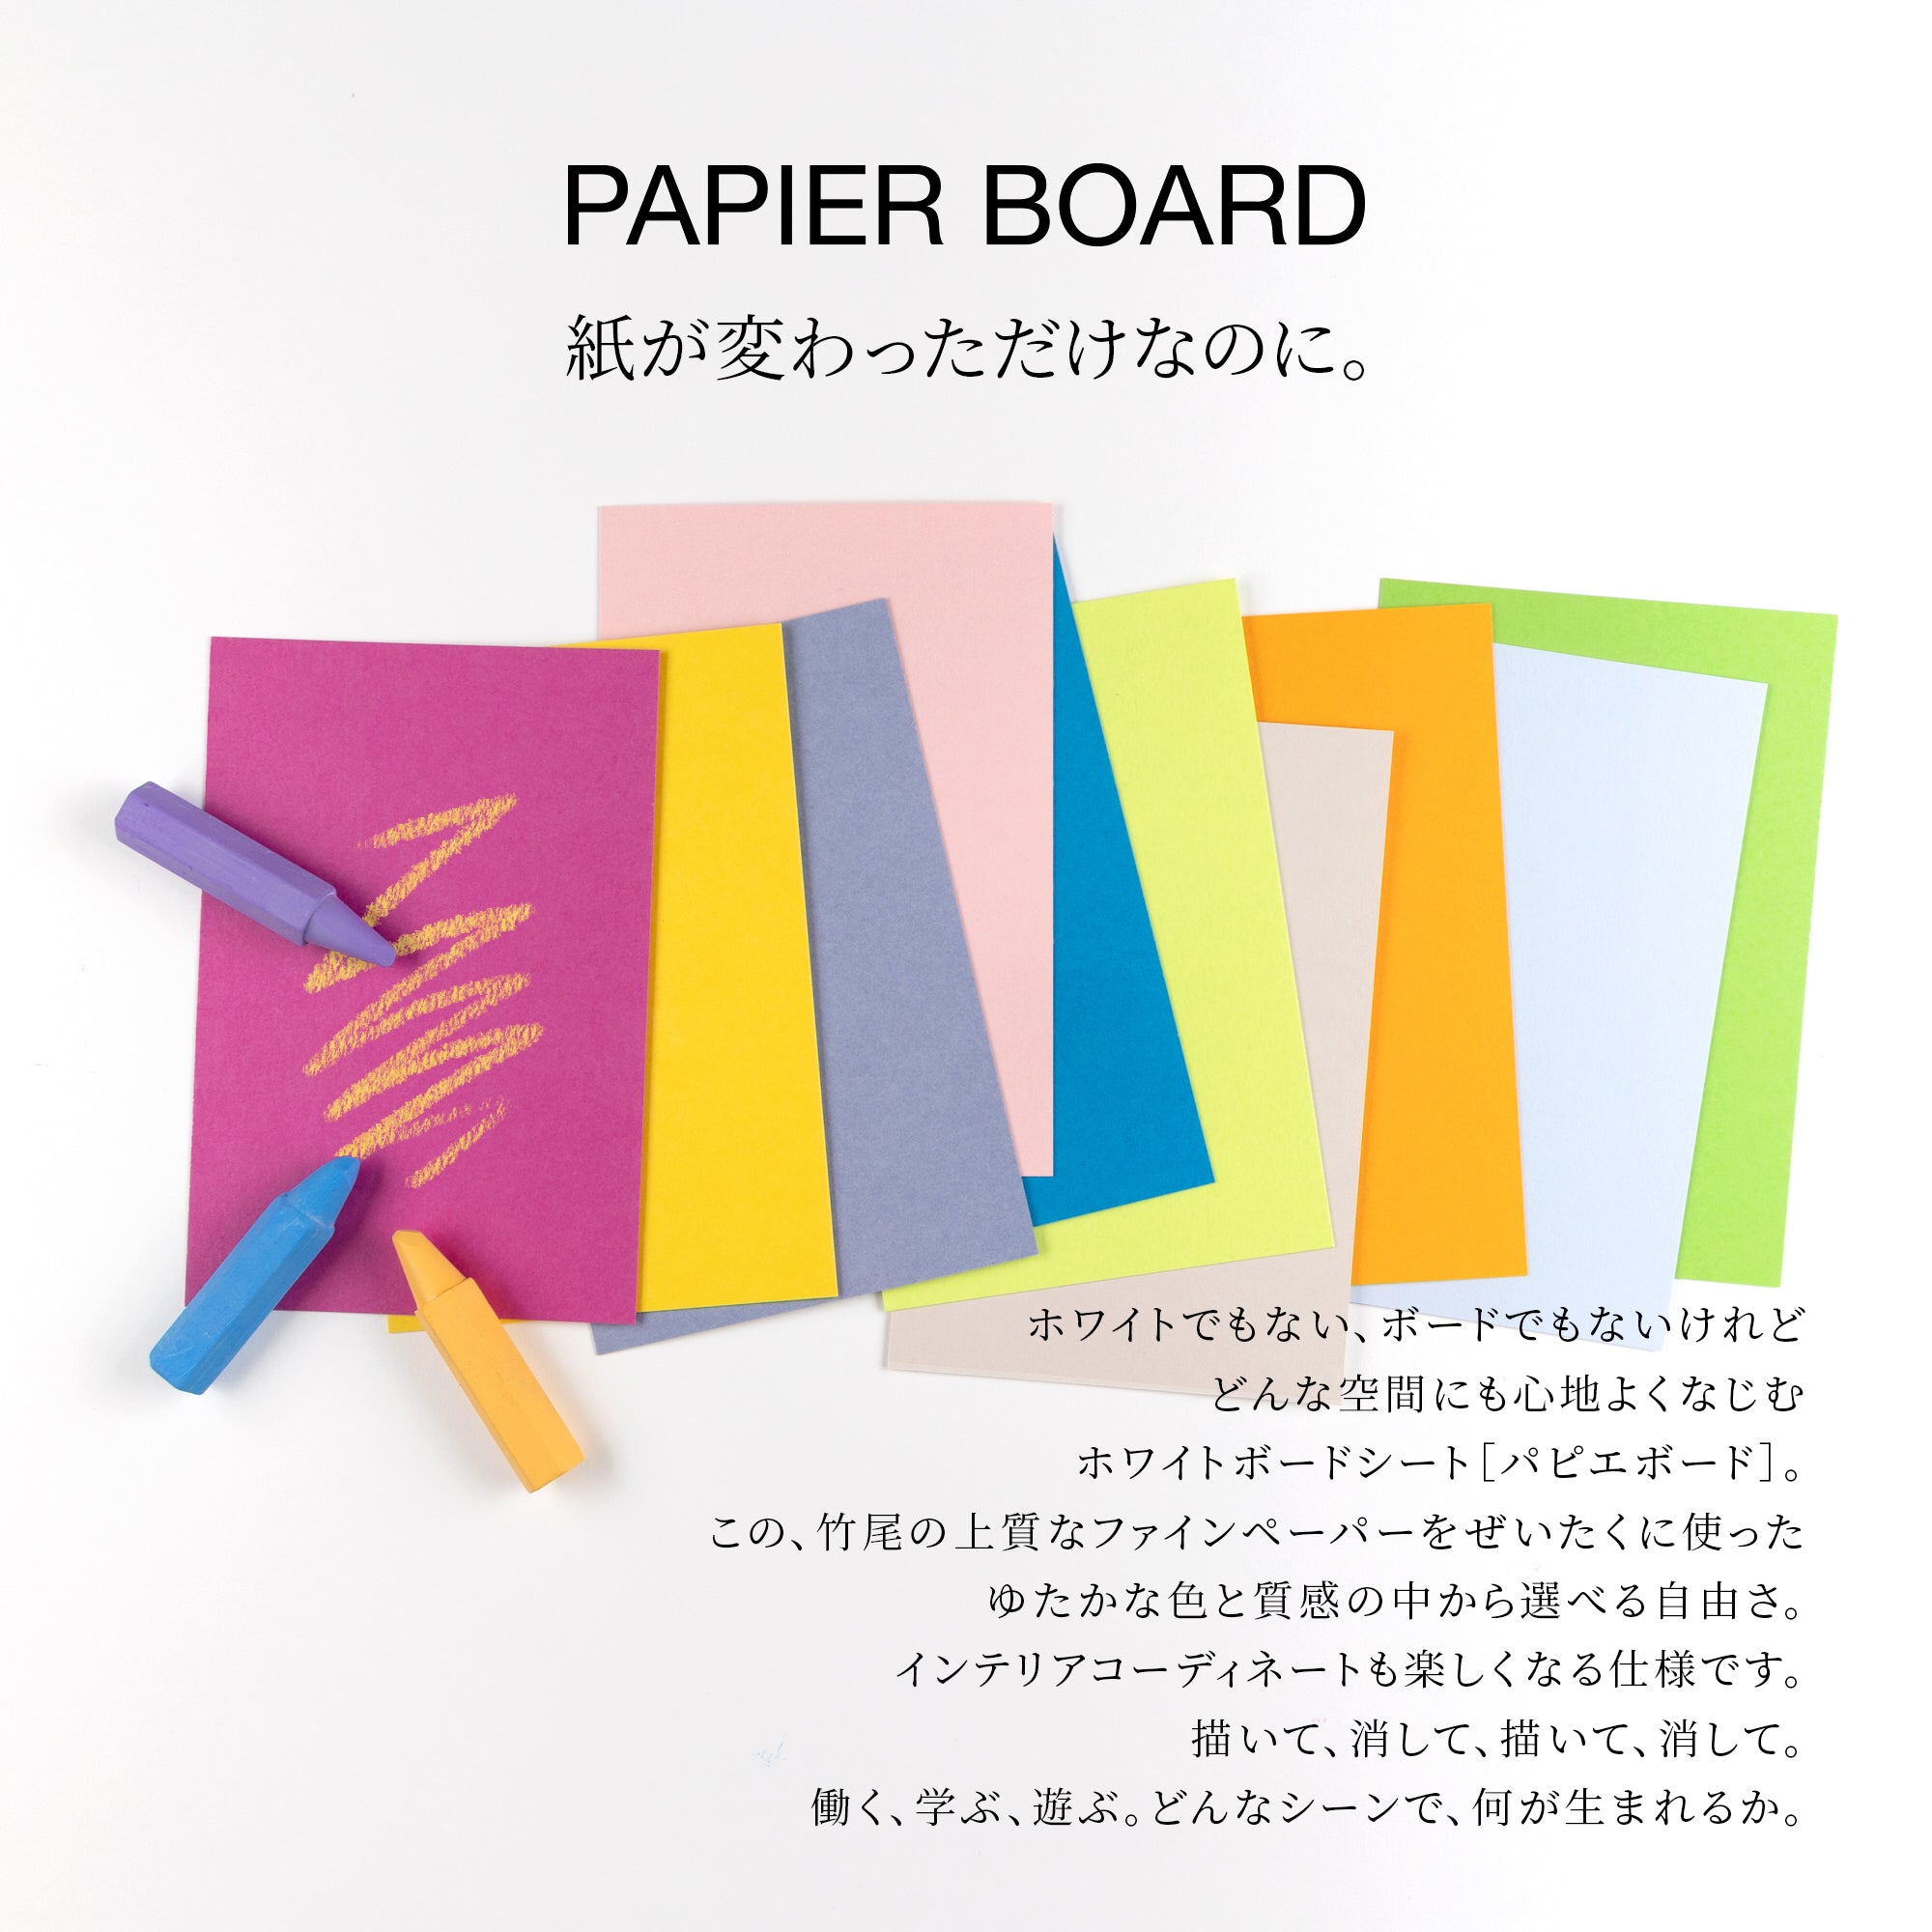 PAPIER BOARD | products.takeopaper.com